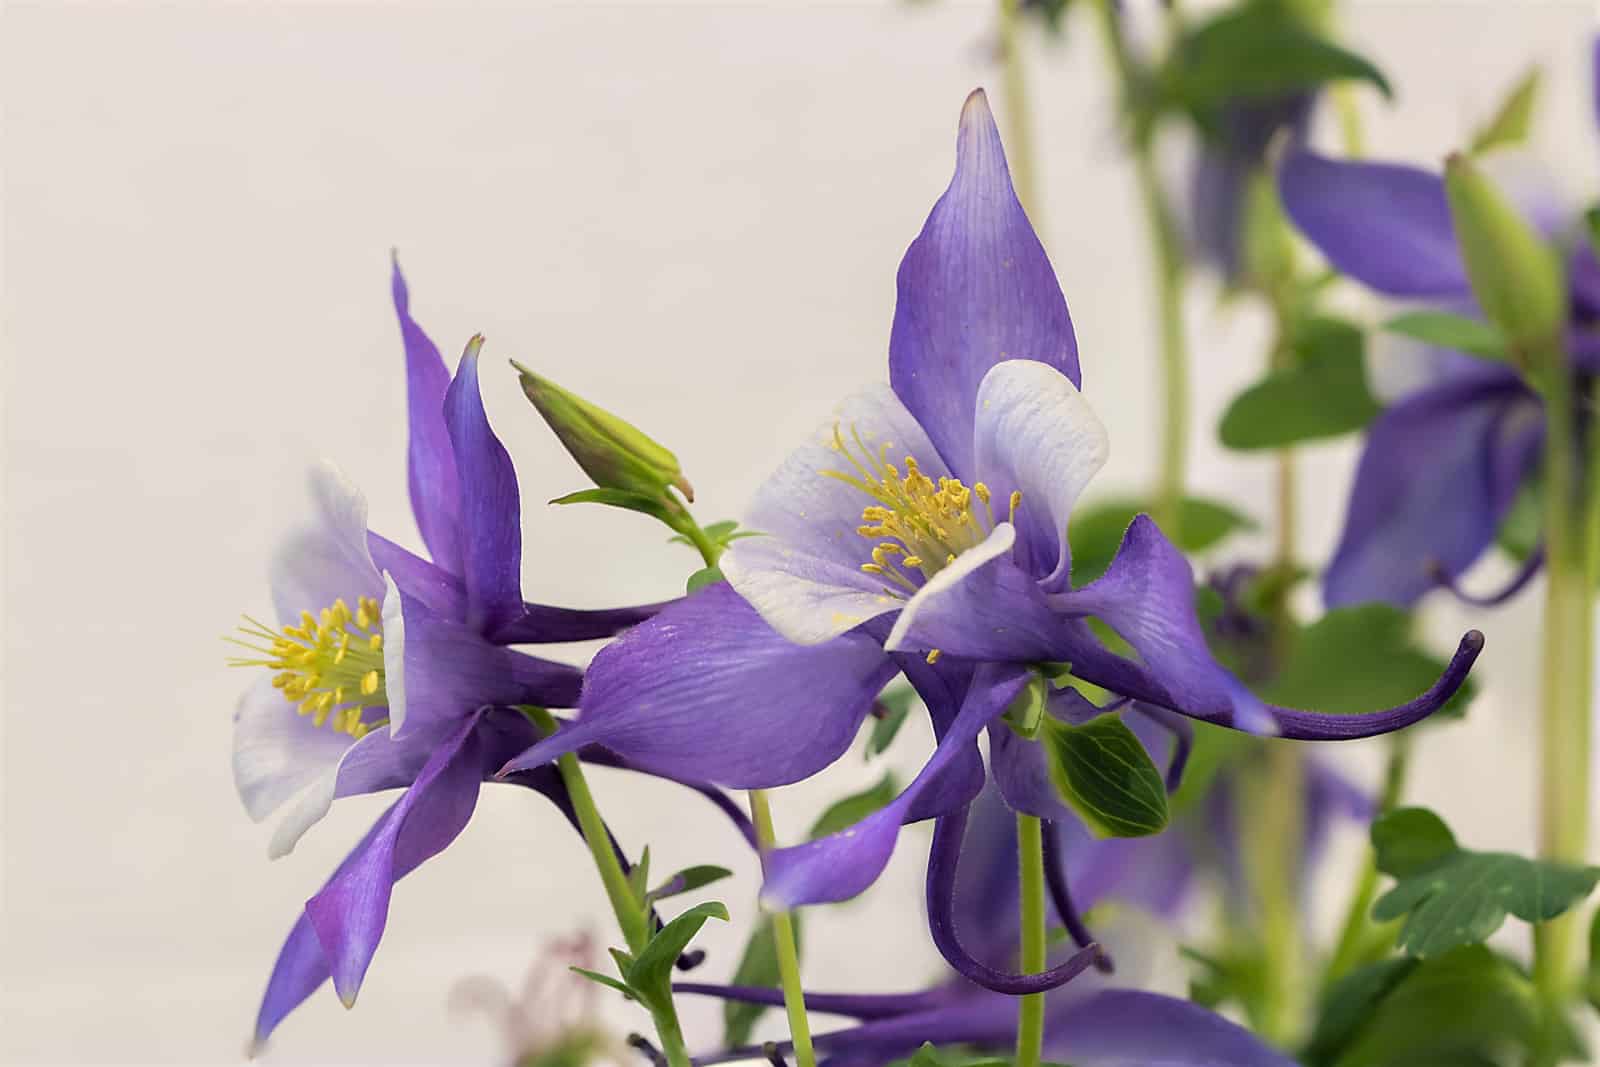 Purple Columbine flowers with stems and leaves.